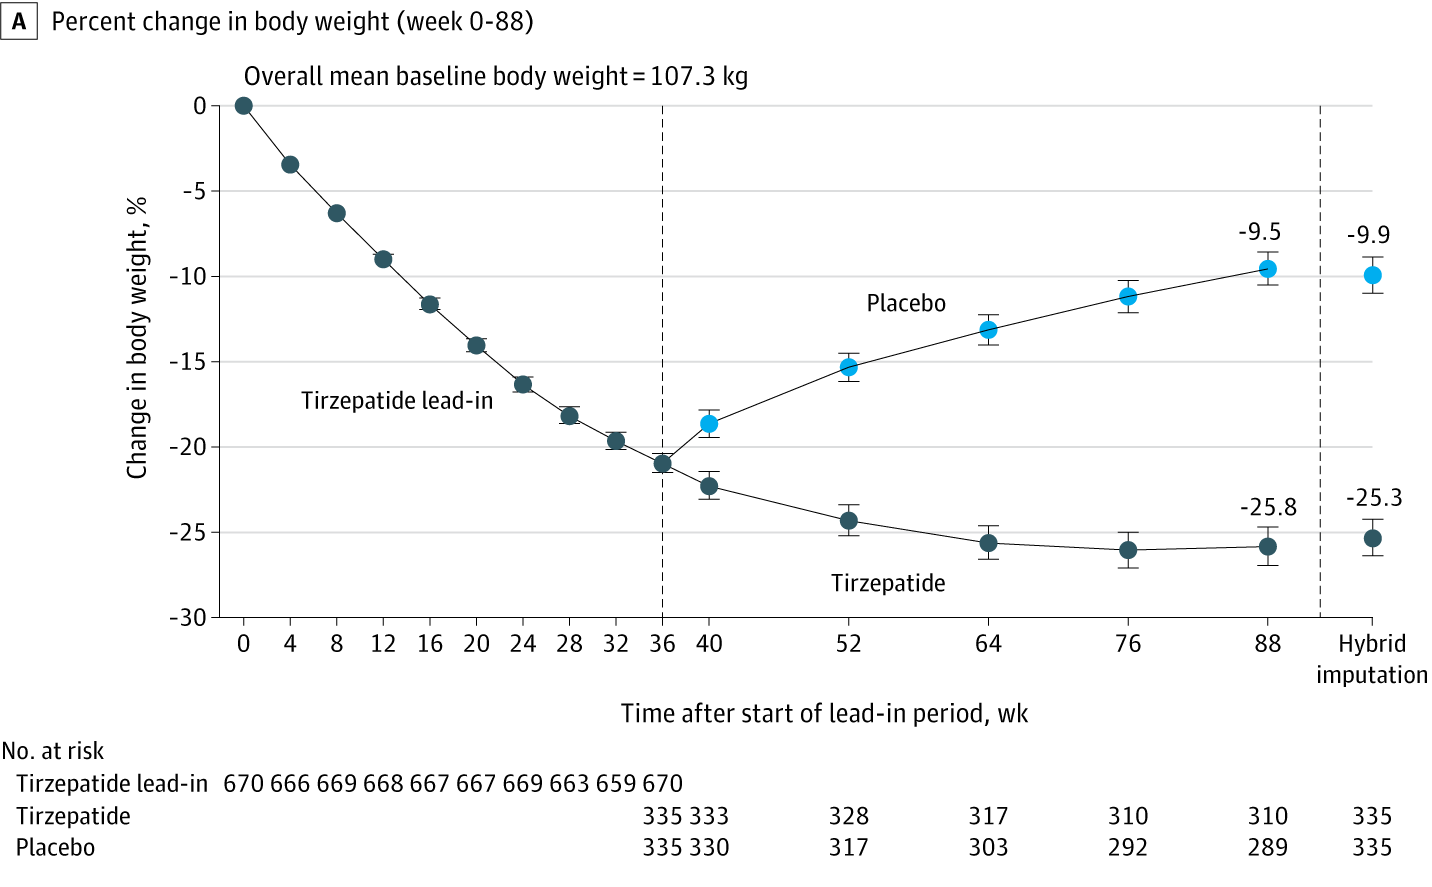 A graph of percent change in body weight over a 36 week lead in period and then a 52 week follow up period. For the group who stay on the drug, weight loss slows dramatically and begins to tick up at the end of 72 weeks. The group who got the placebo began regaining weight immediately. 